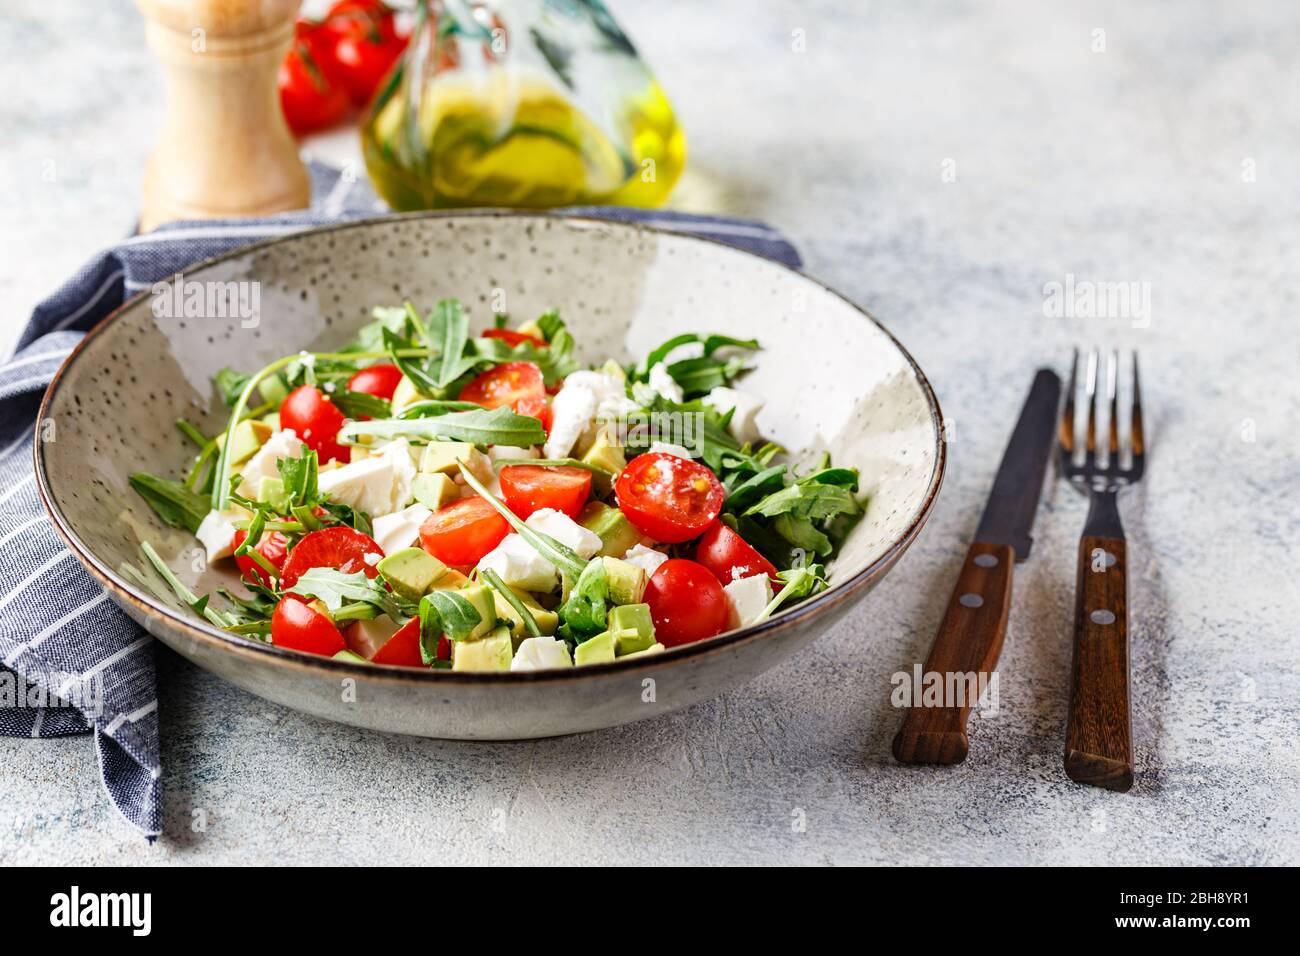 Green salad with avocado, cherry tomatoes and feta cheese. Healthy diet vegetarian summer vegetable salad. Table setting, food concept. Stock Photo